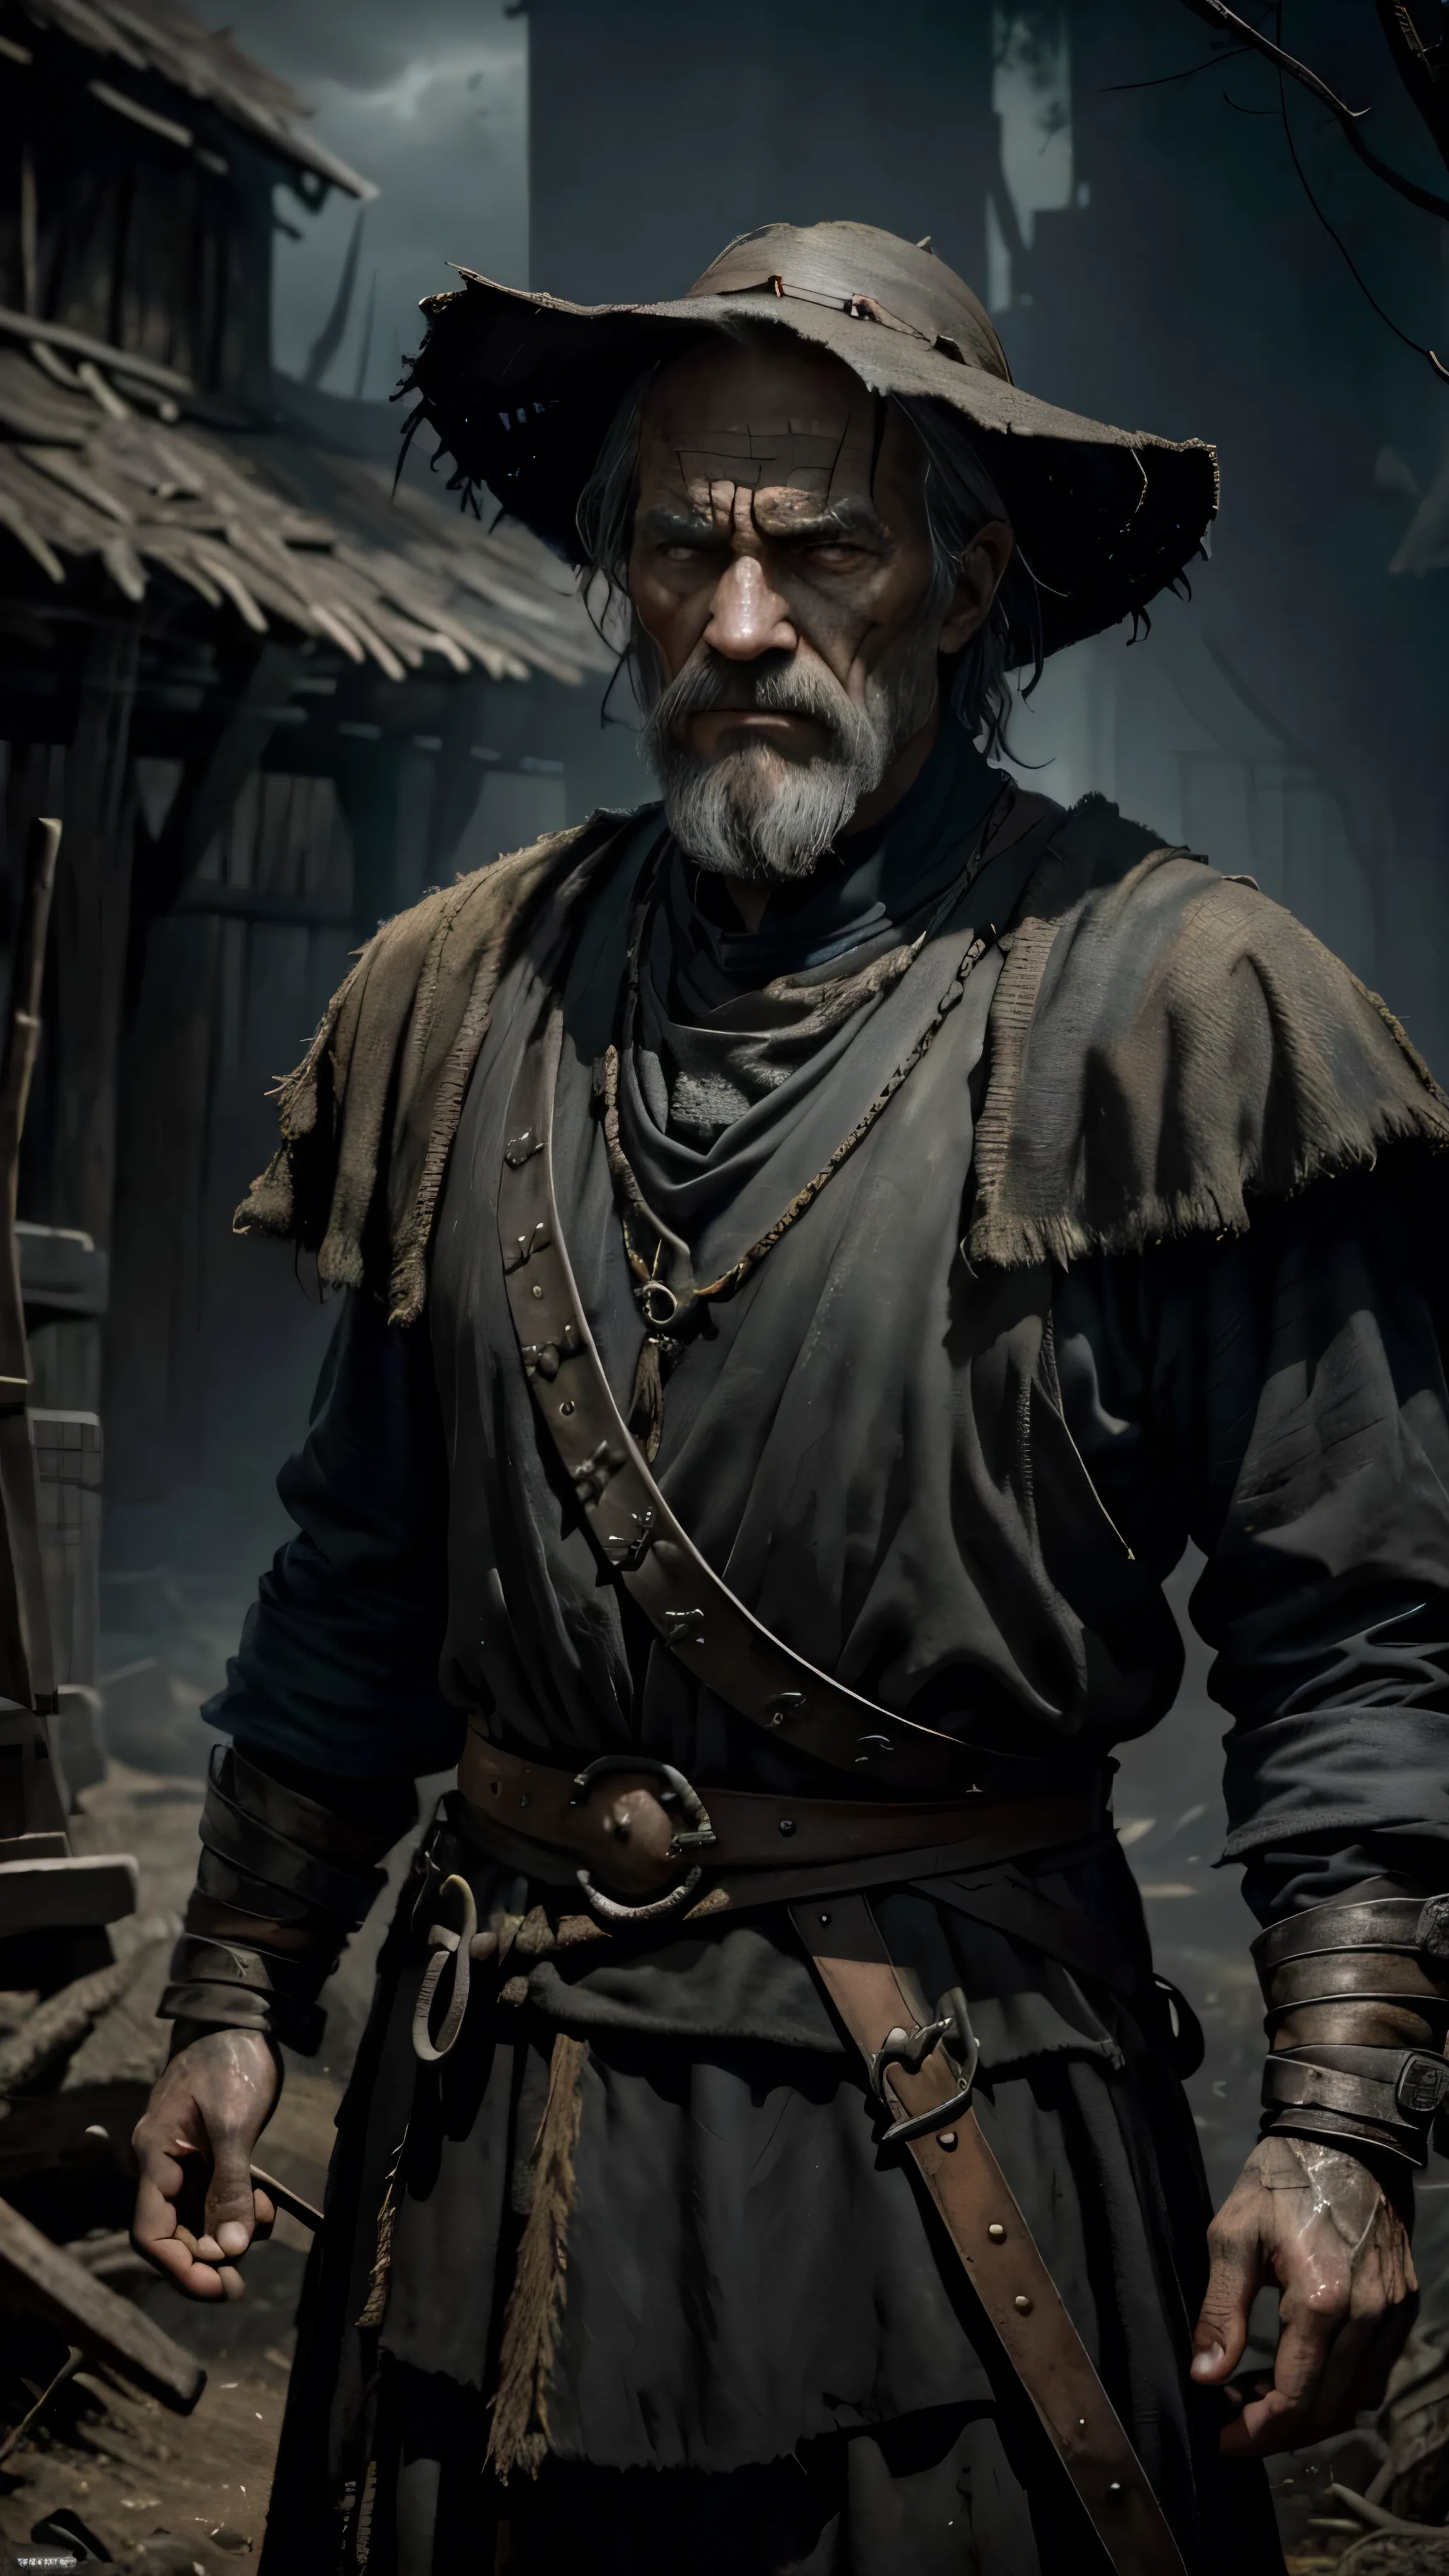 A mesmerizing, award-winning oil painting by Aleksi Briclot, Style-Crypt's Style, showcases an older male medieval peasant with a brooding, sinister demeanor. The scene is illuminated by backlighting, casting dramatic shadows and highlighting the intricate details of the subject's weathered face and worn clothing. The painting is executed with smooth strokes and sharp focus, following the rule of thirds for a captivating composition. The peasant's dark fantasy world is hinted at through intricate details in his attire, and his angry expression speaks volumes of his inner turmoil. The painting is presented in a medium shot, with a shallow depth of